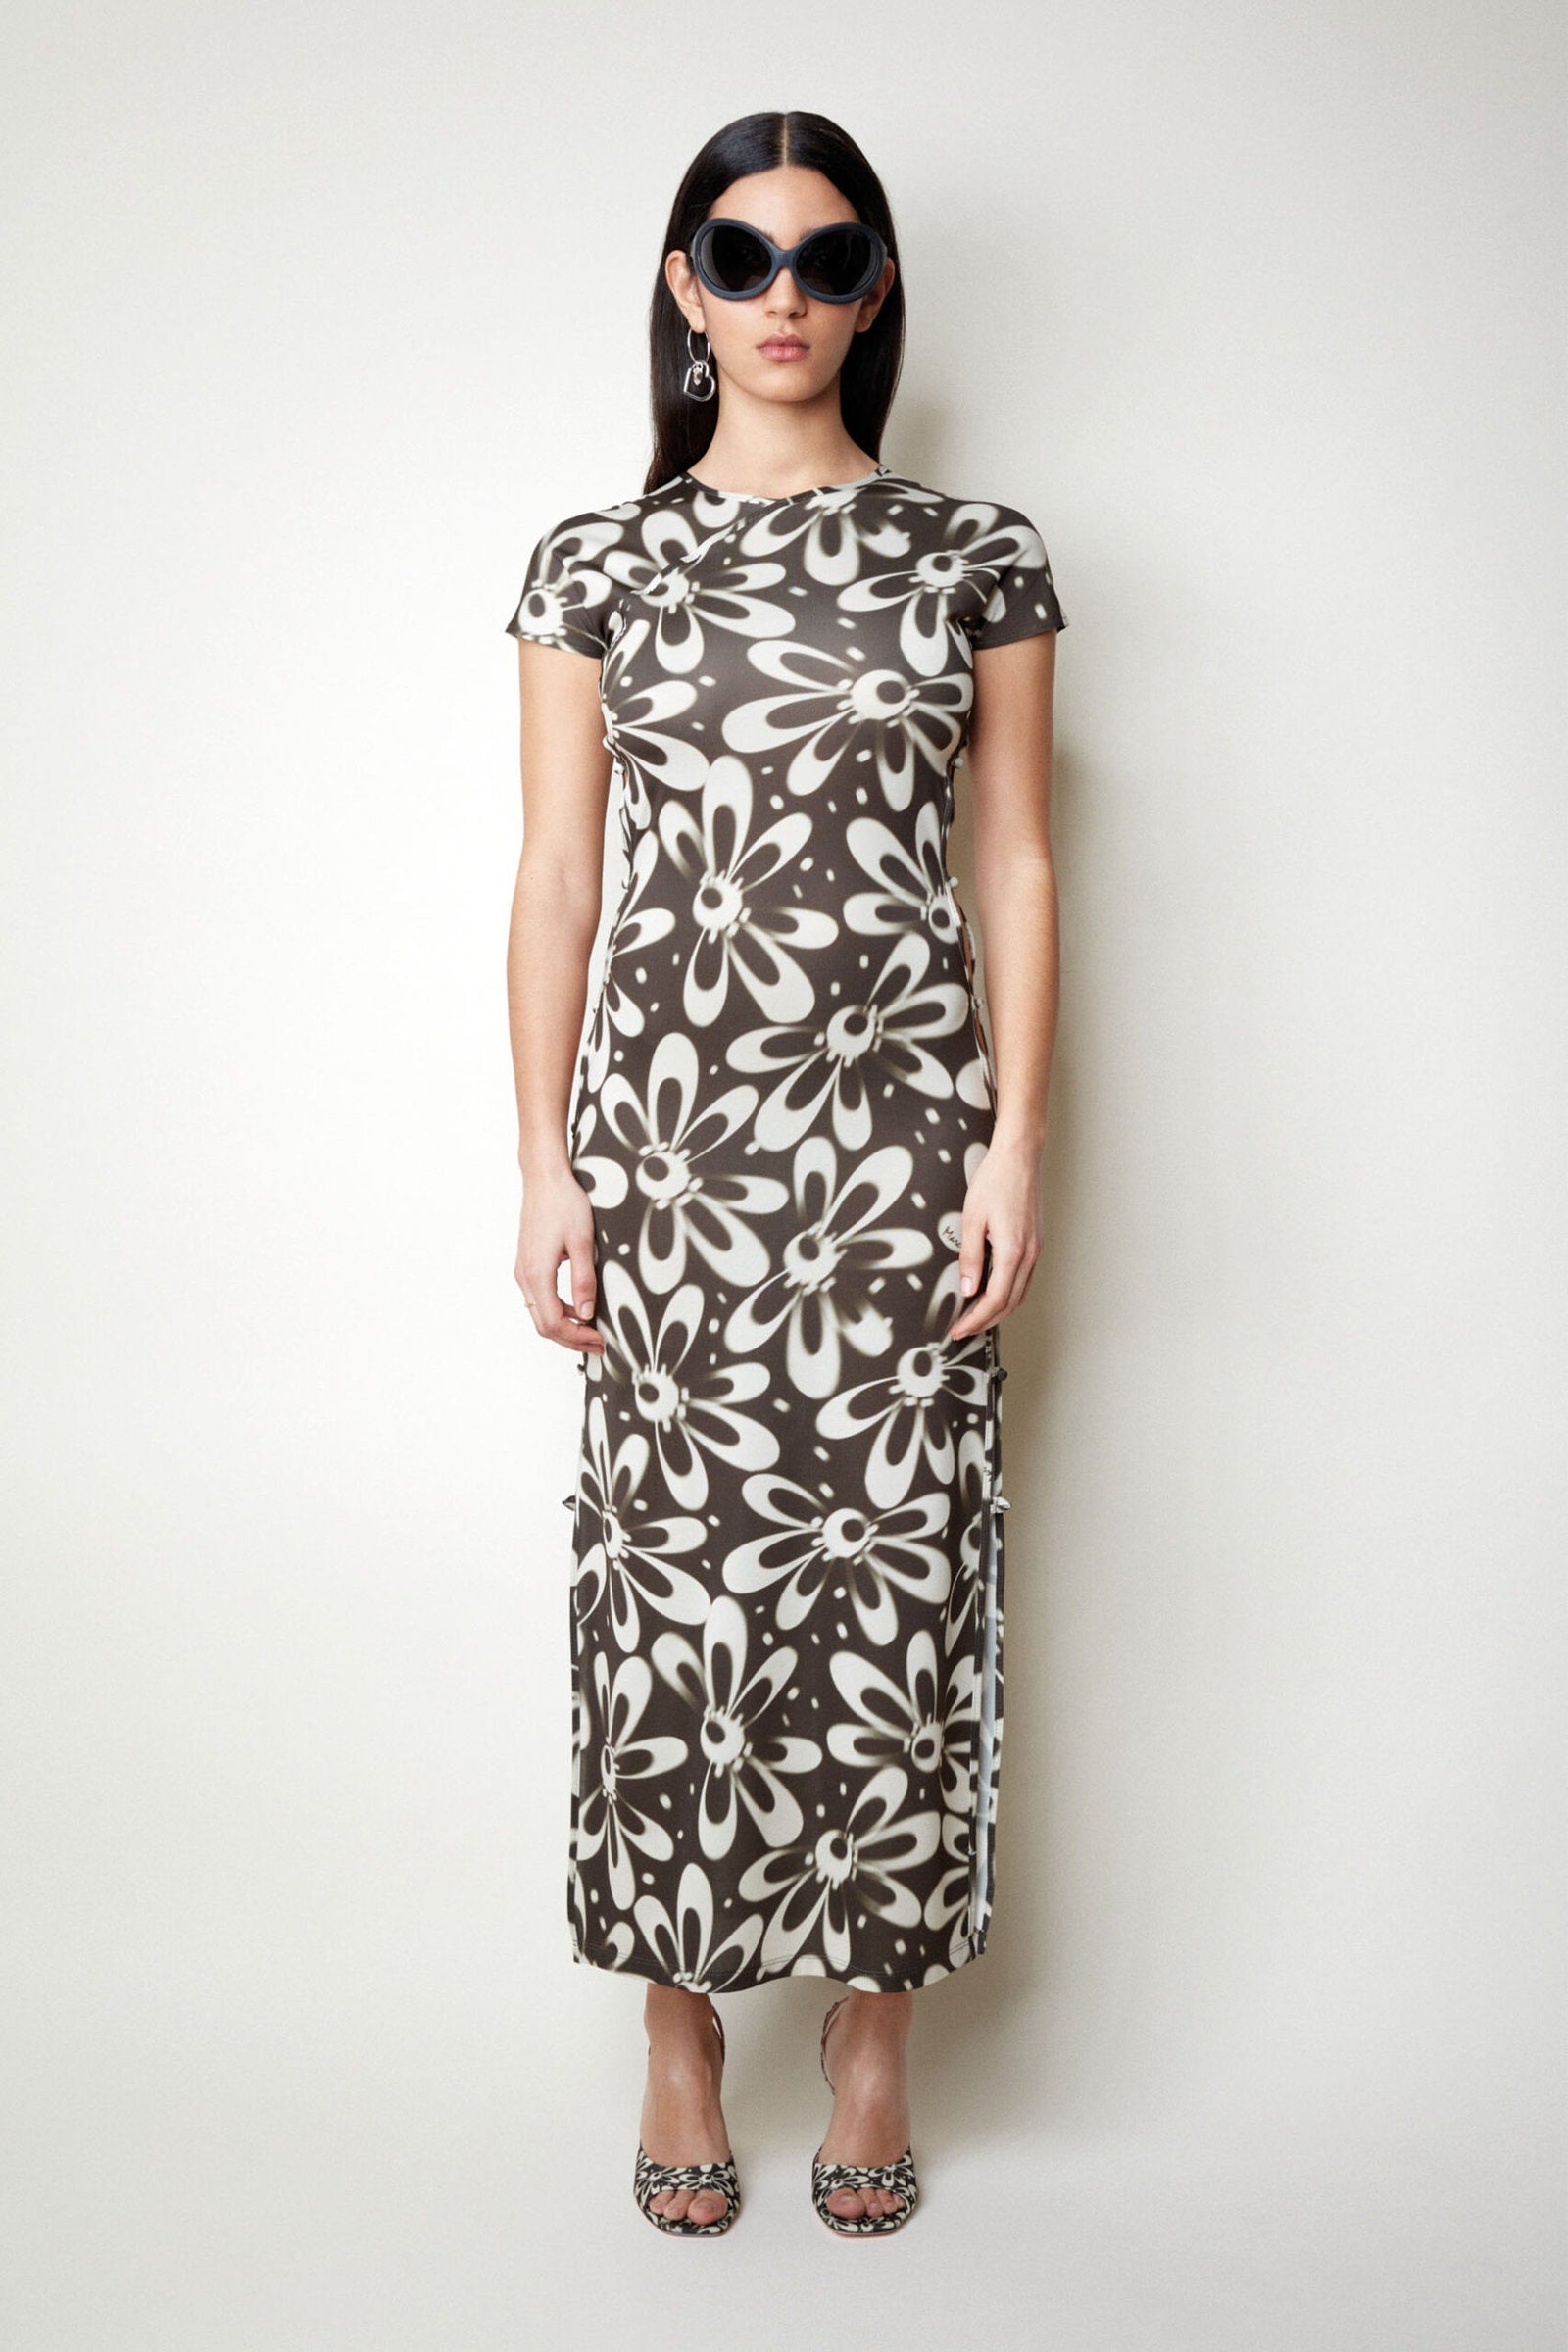 TCHIKIBOUM LONG DRESS in floral cappuccino